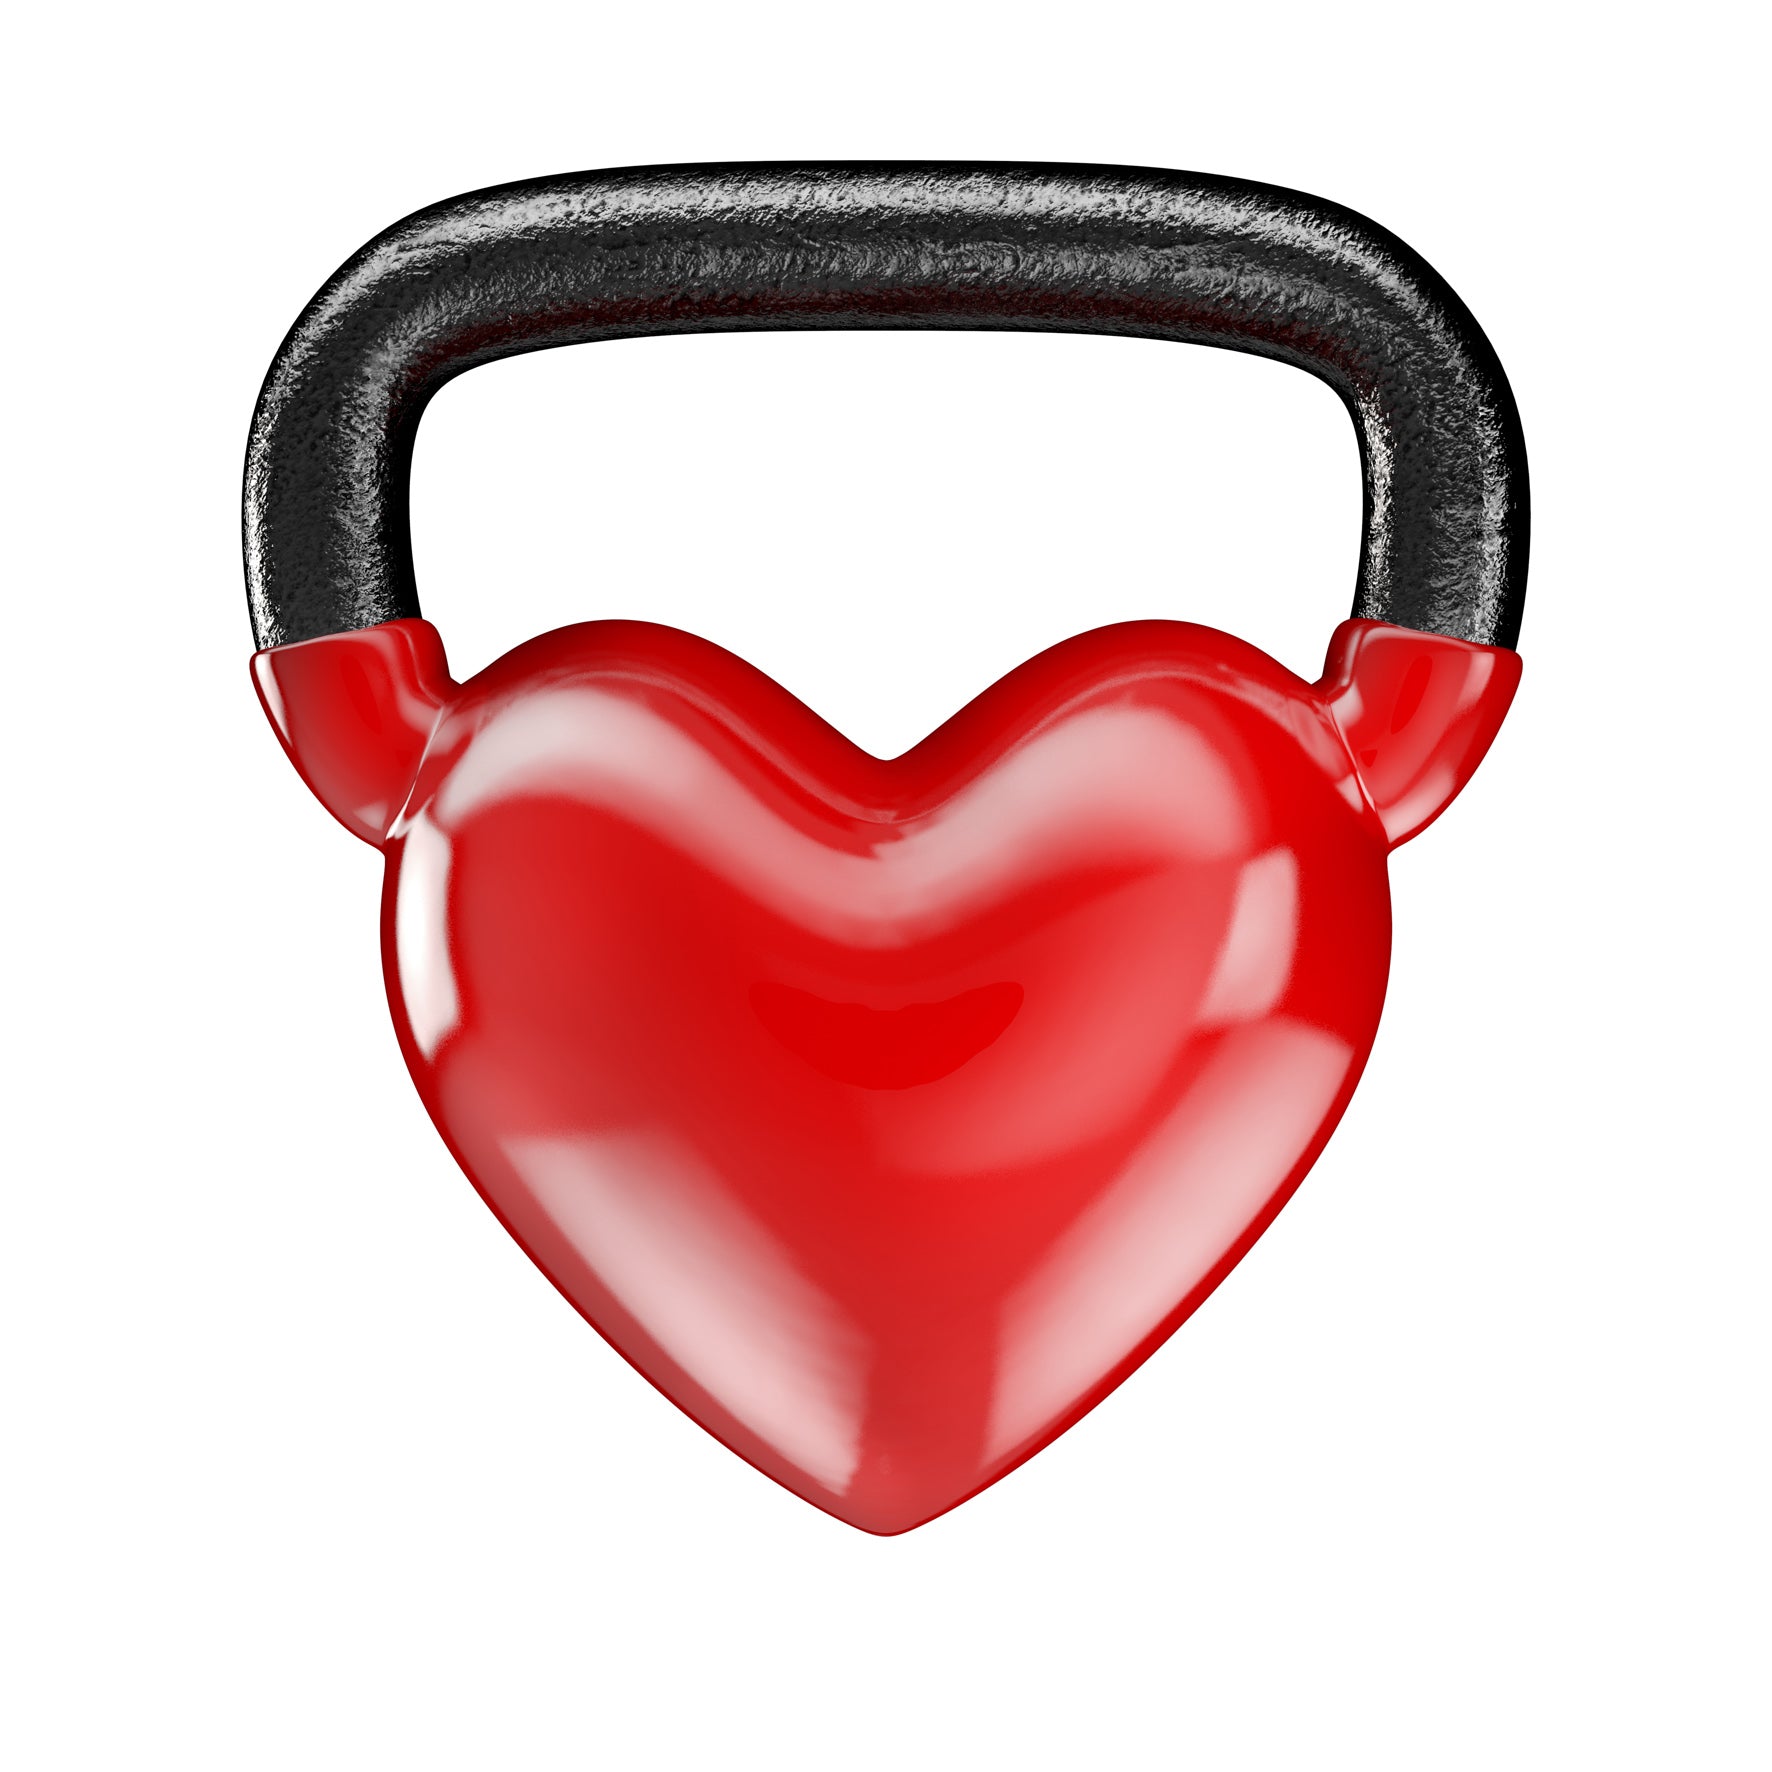 4 Ways Frequent Intense Exercise Keeps Your Heart Healthy